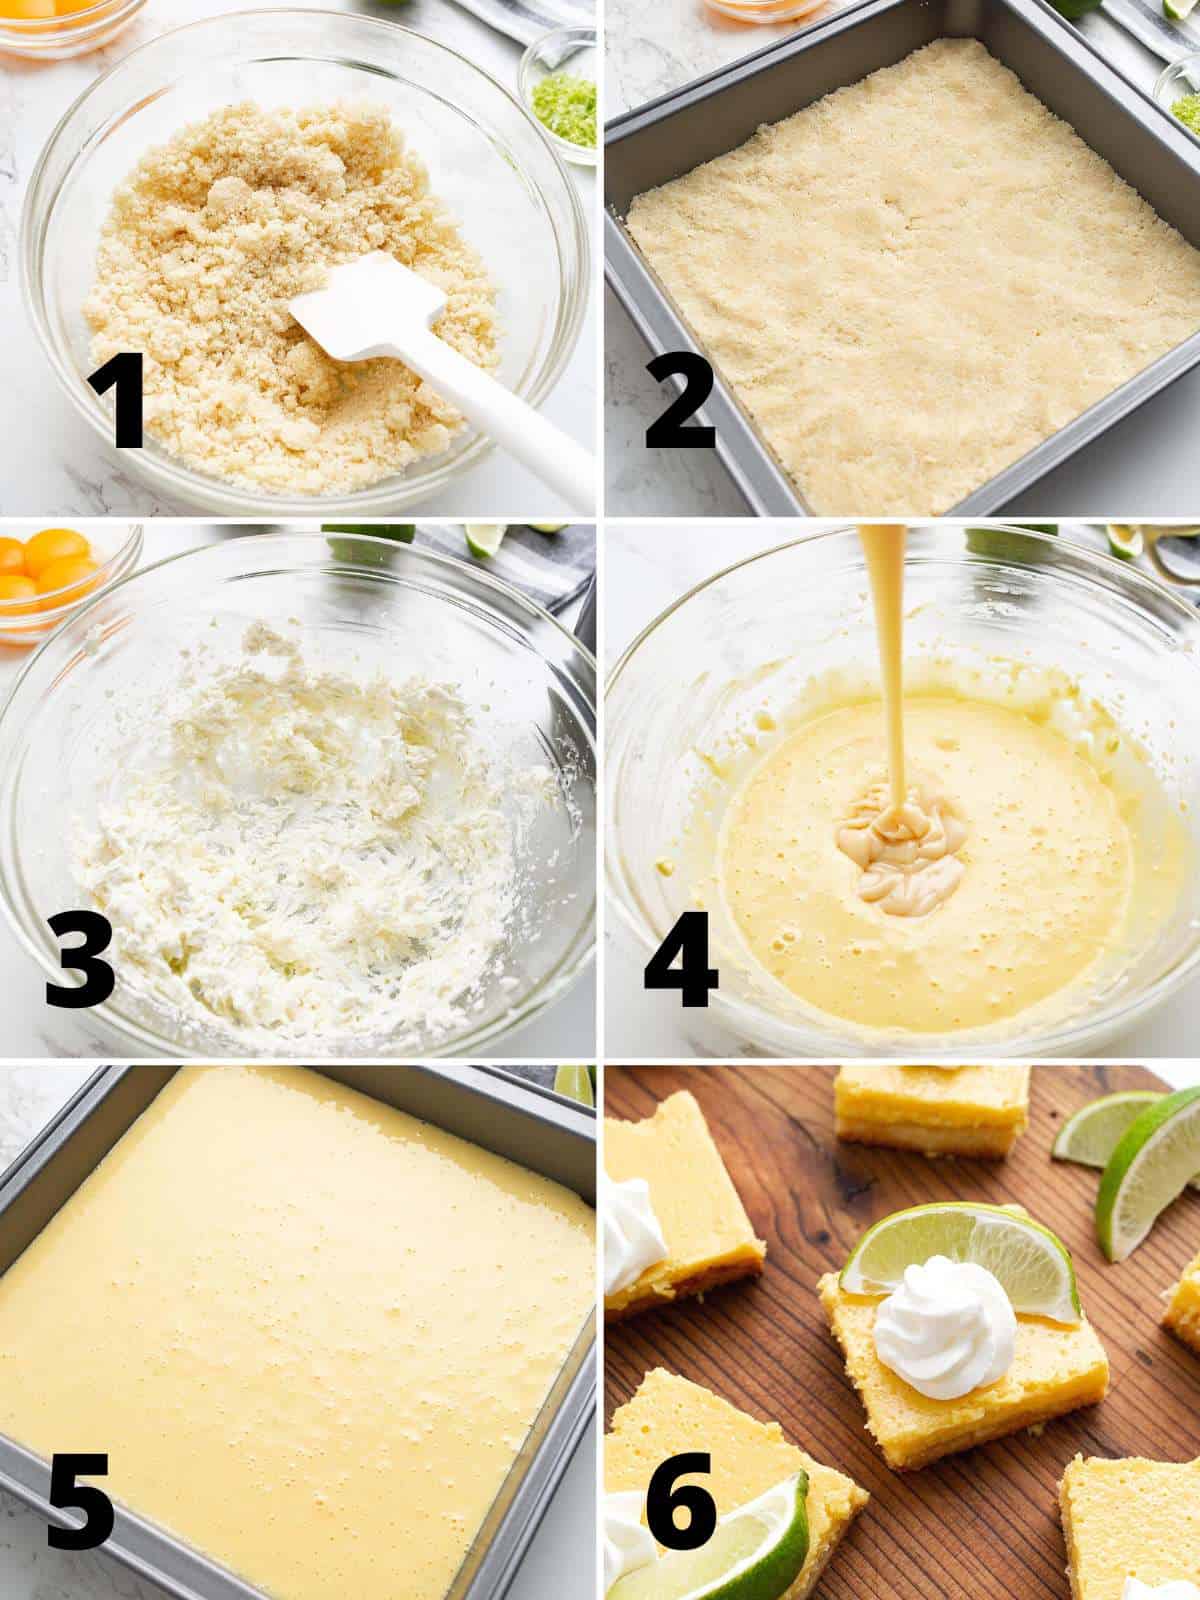 A collage of 6 images showing the steps for making key lime pie bars.